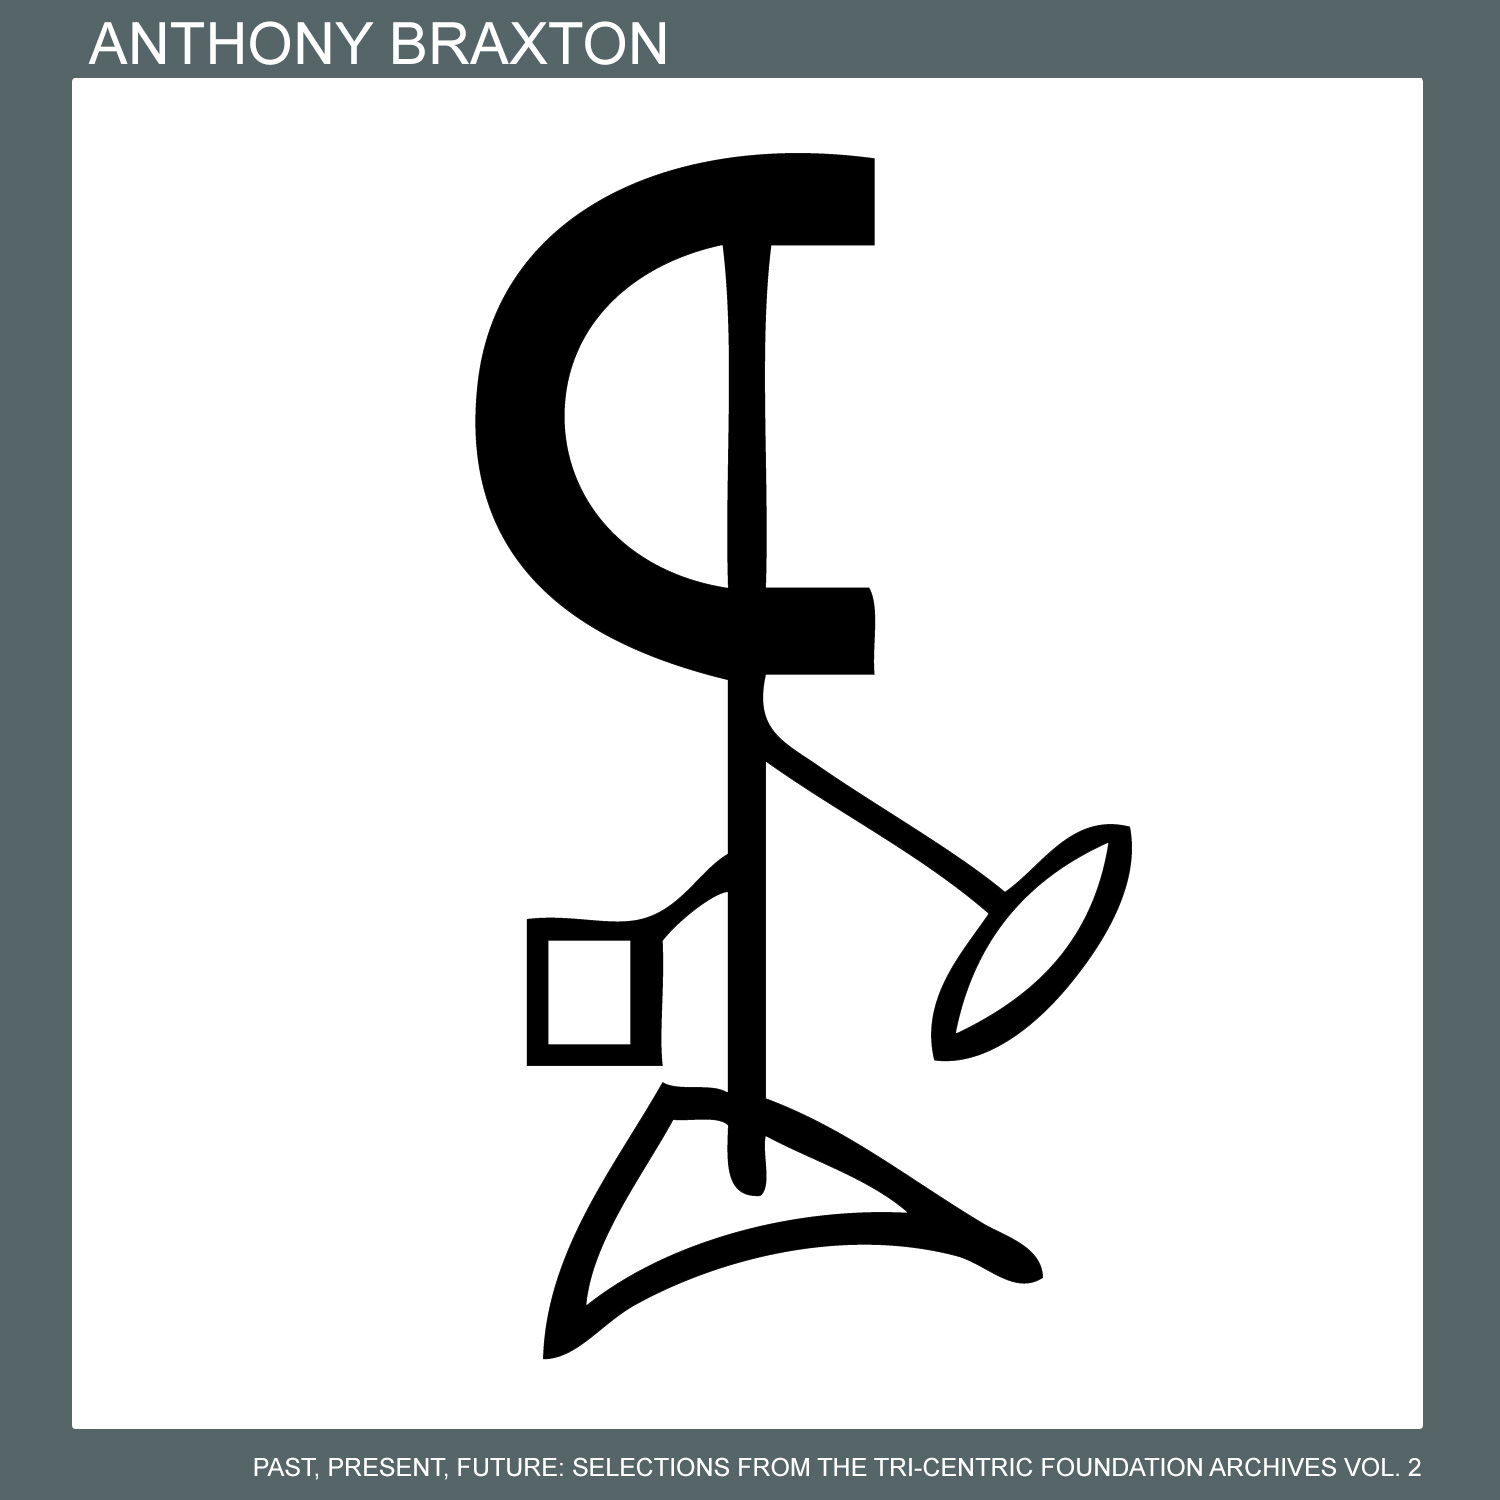 ANTHONY BRAXTON - Past, Present, Future: Selections from the Tri-Centric Foundation Archives Vol. 2 cover 